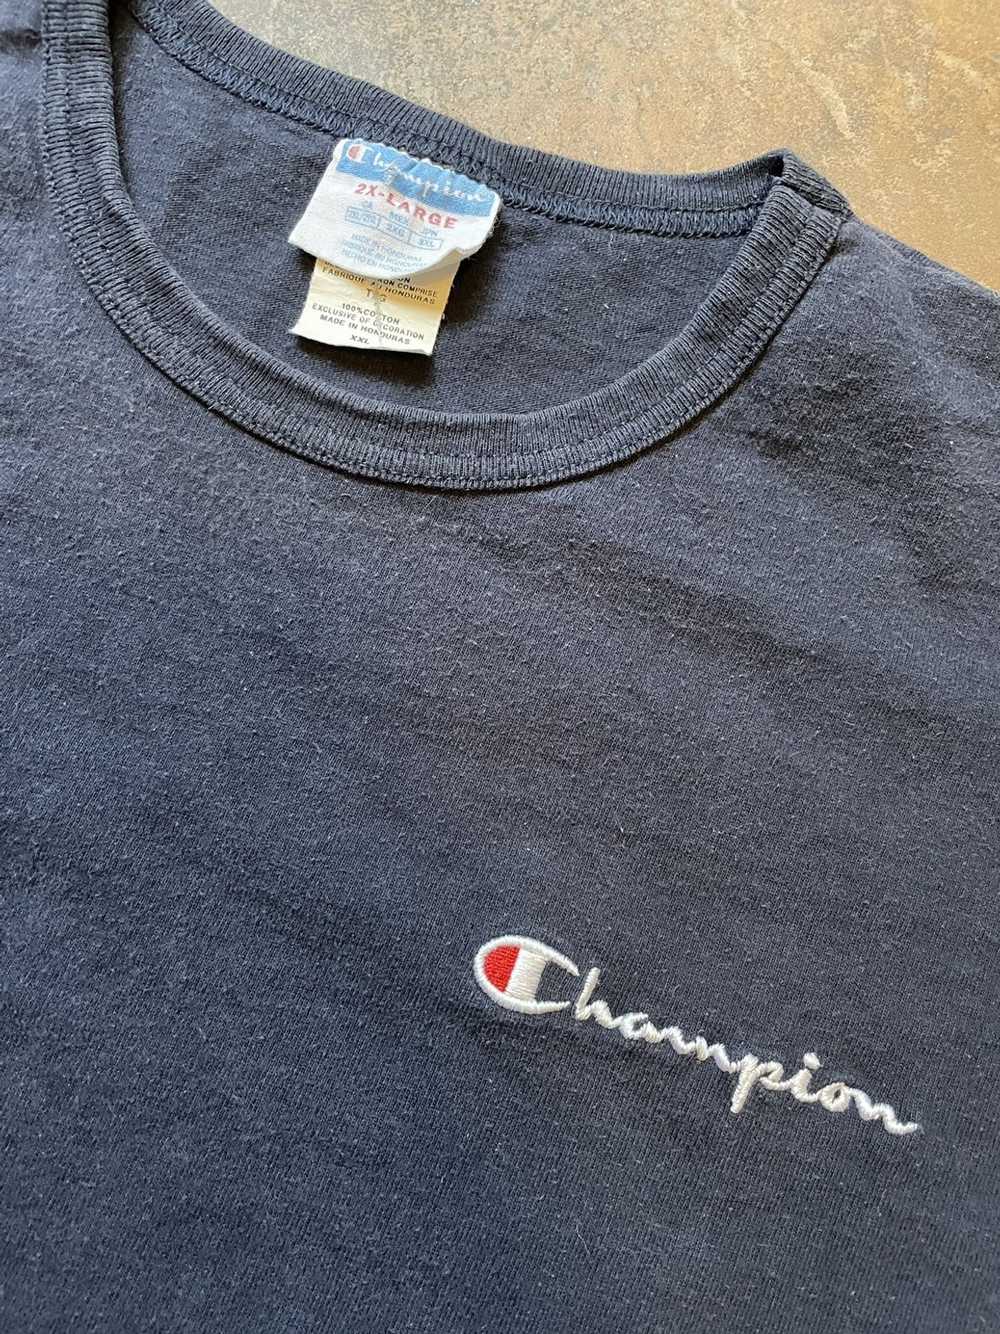 Champion Vintage champion spell out t shirt - image 2